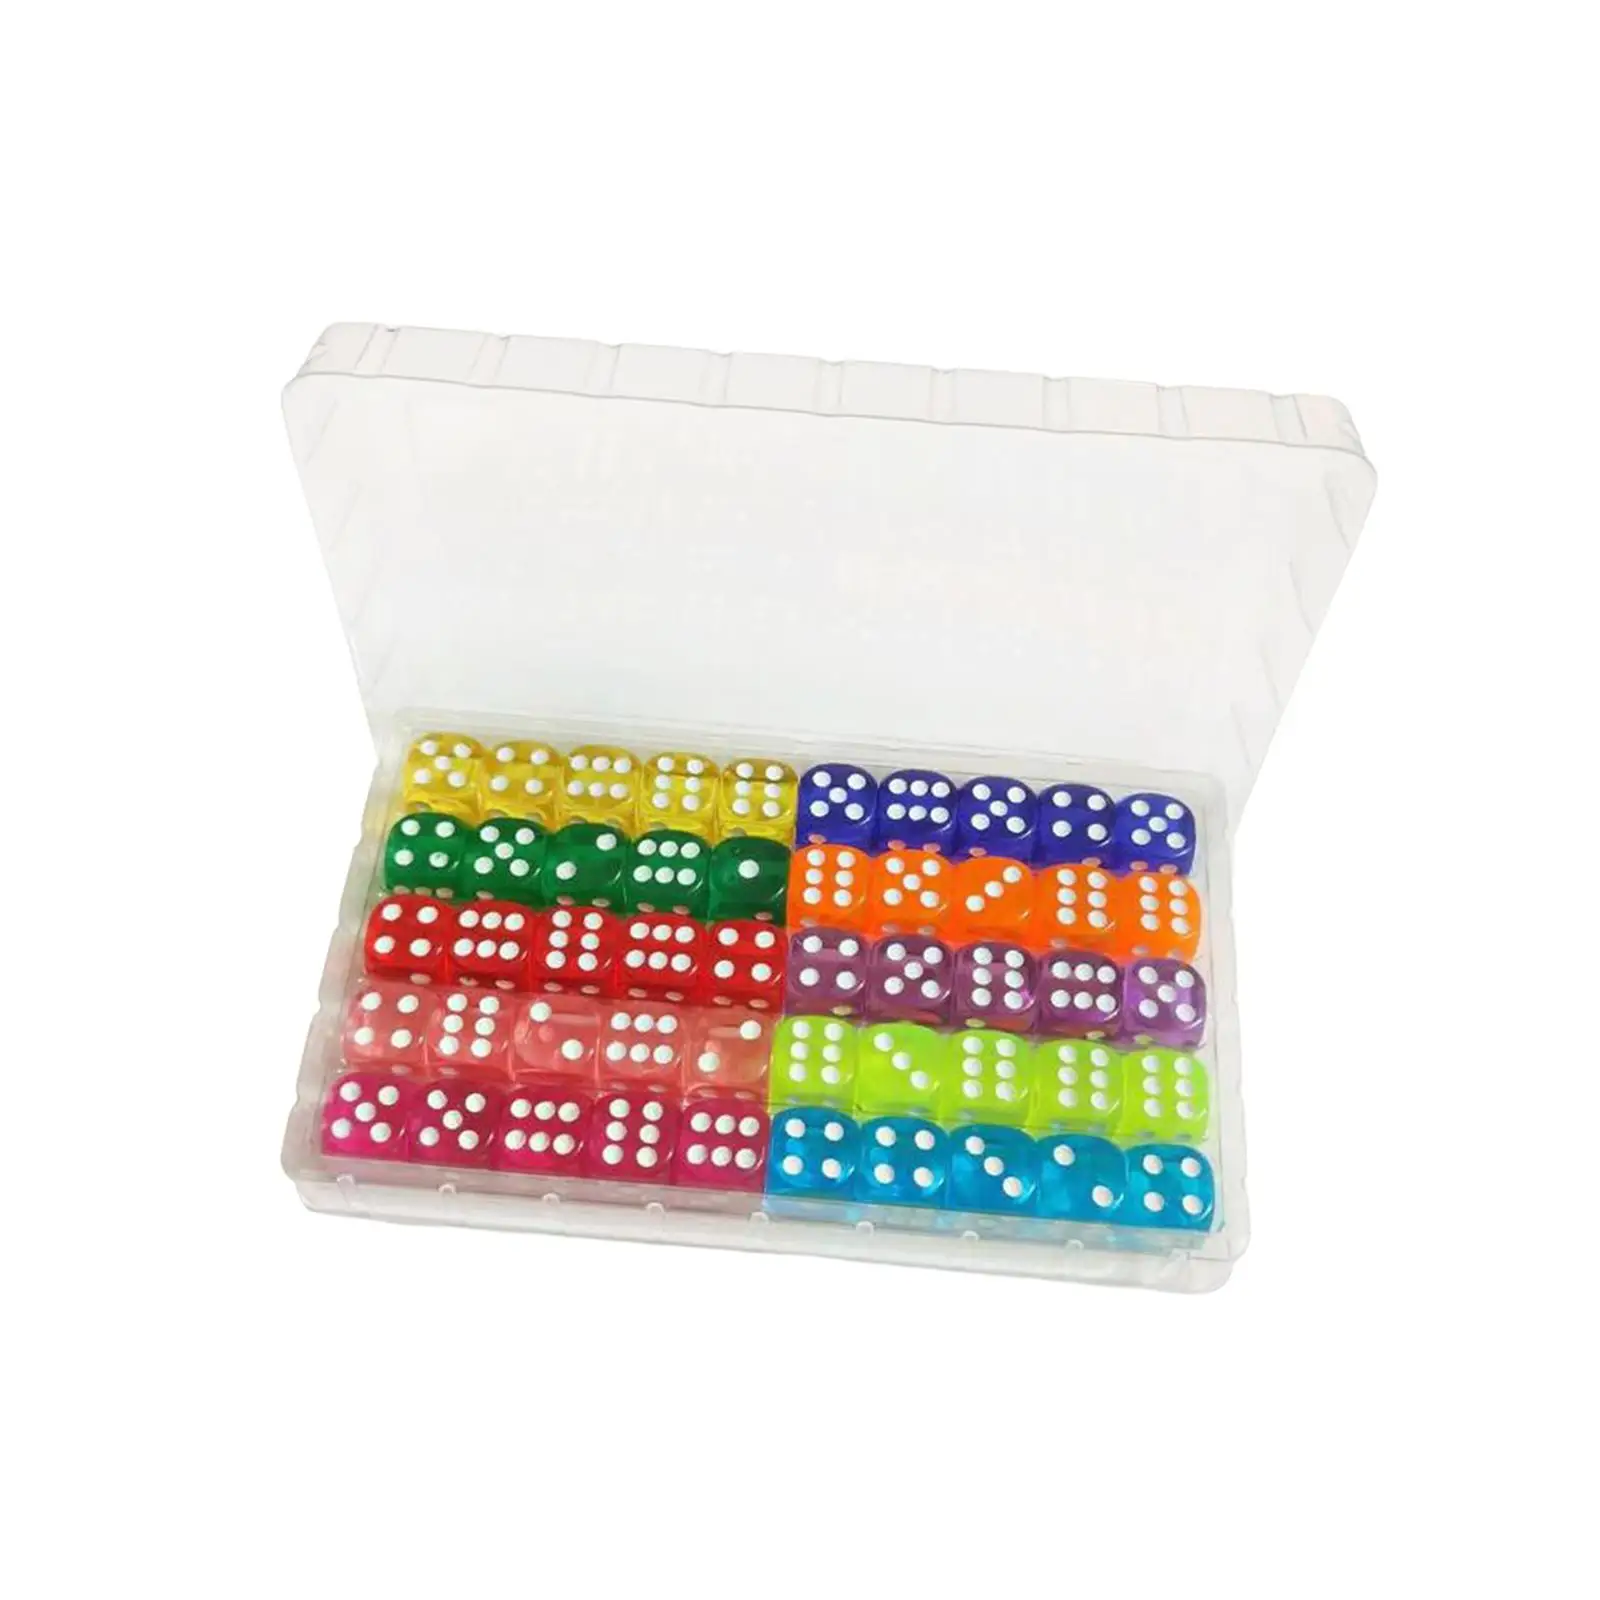 50 Pieces 6 Sided Dices Set 16mm Dices Game Dices Math Counting Teaching Aids Entertainment Toys for Bar Card Game Table Game